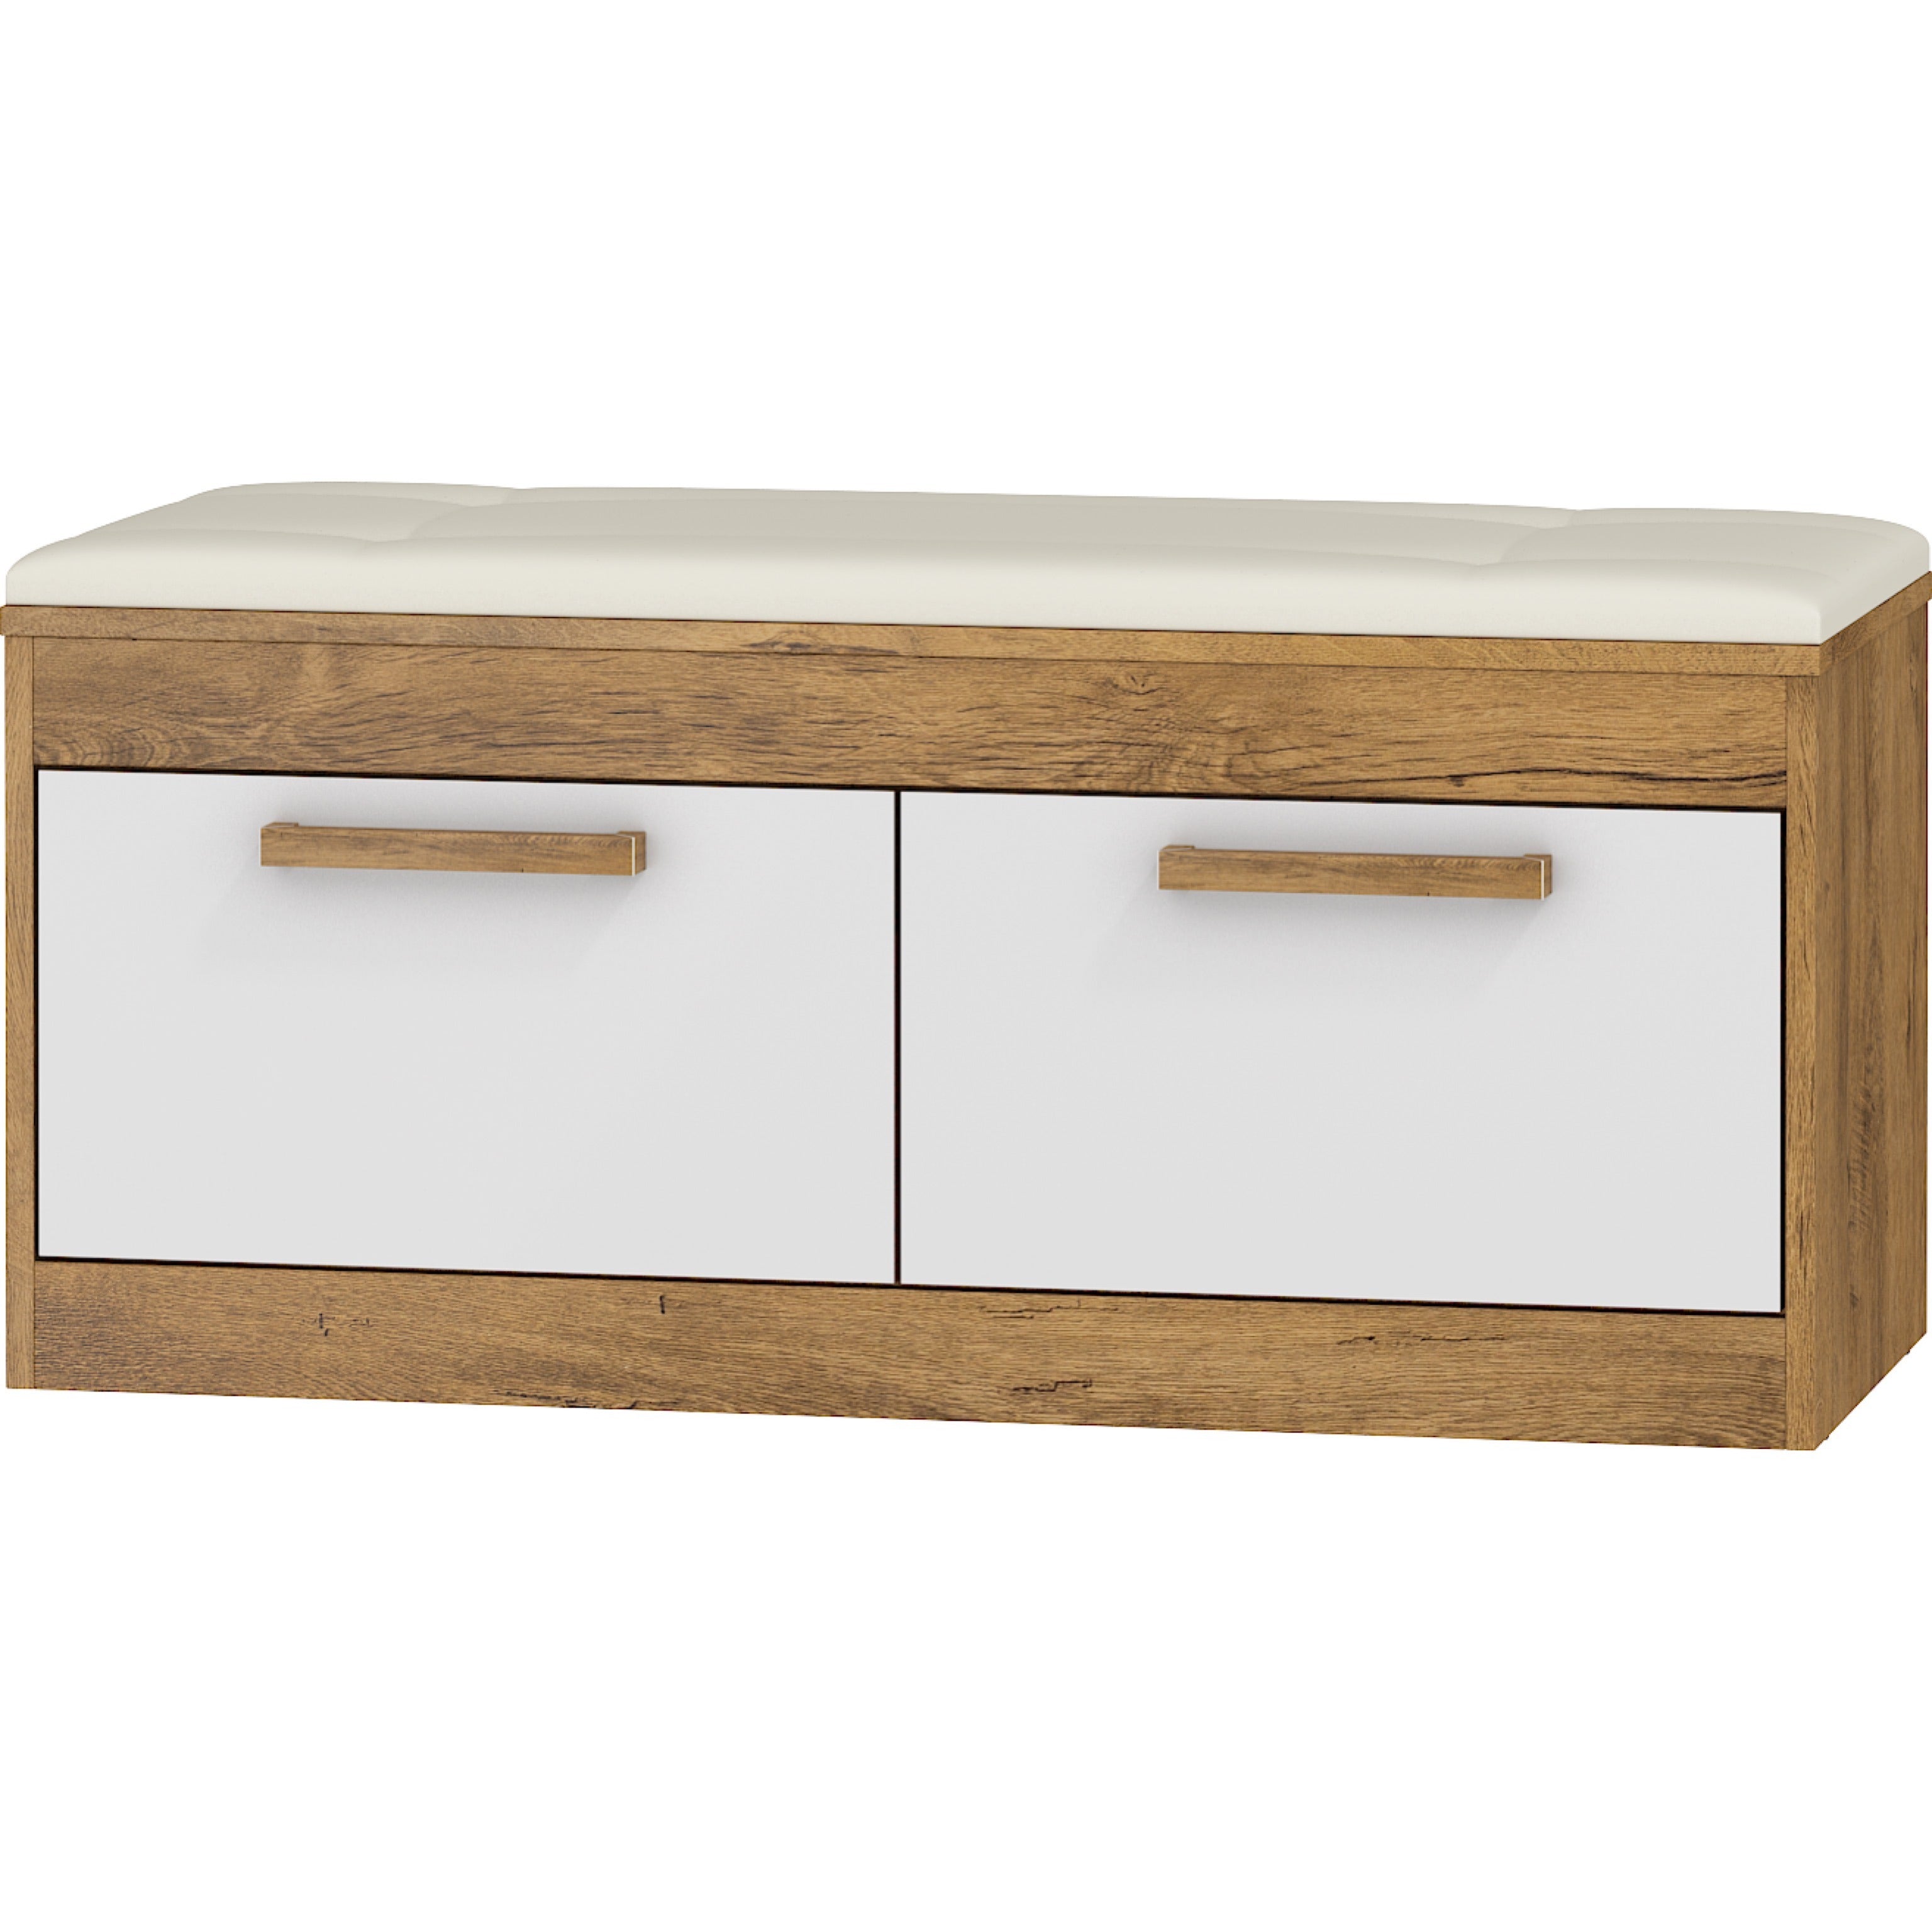 Maximus Upholstered 2 Cabinet Entryway Storage Bench Shoe